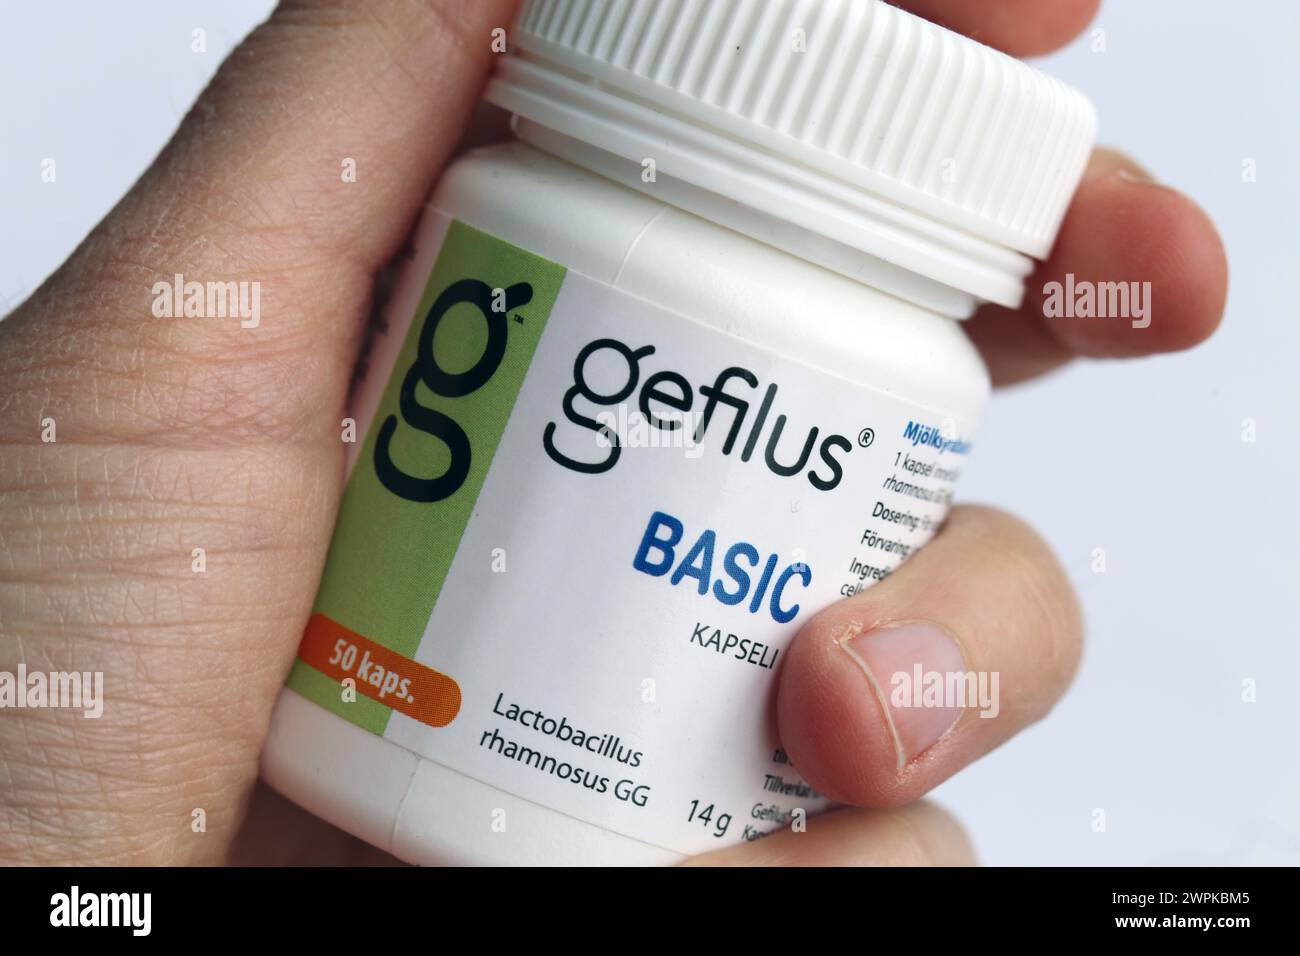 Espoo, Finland - April 2020: Gefilus Basic lactobacillus capsules. Over the counter pharmaceutical product to support gastrointestinal track function. Stock Photo